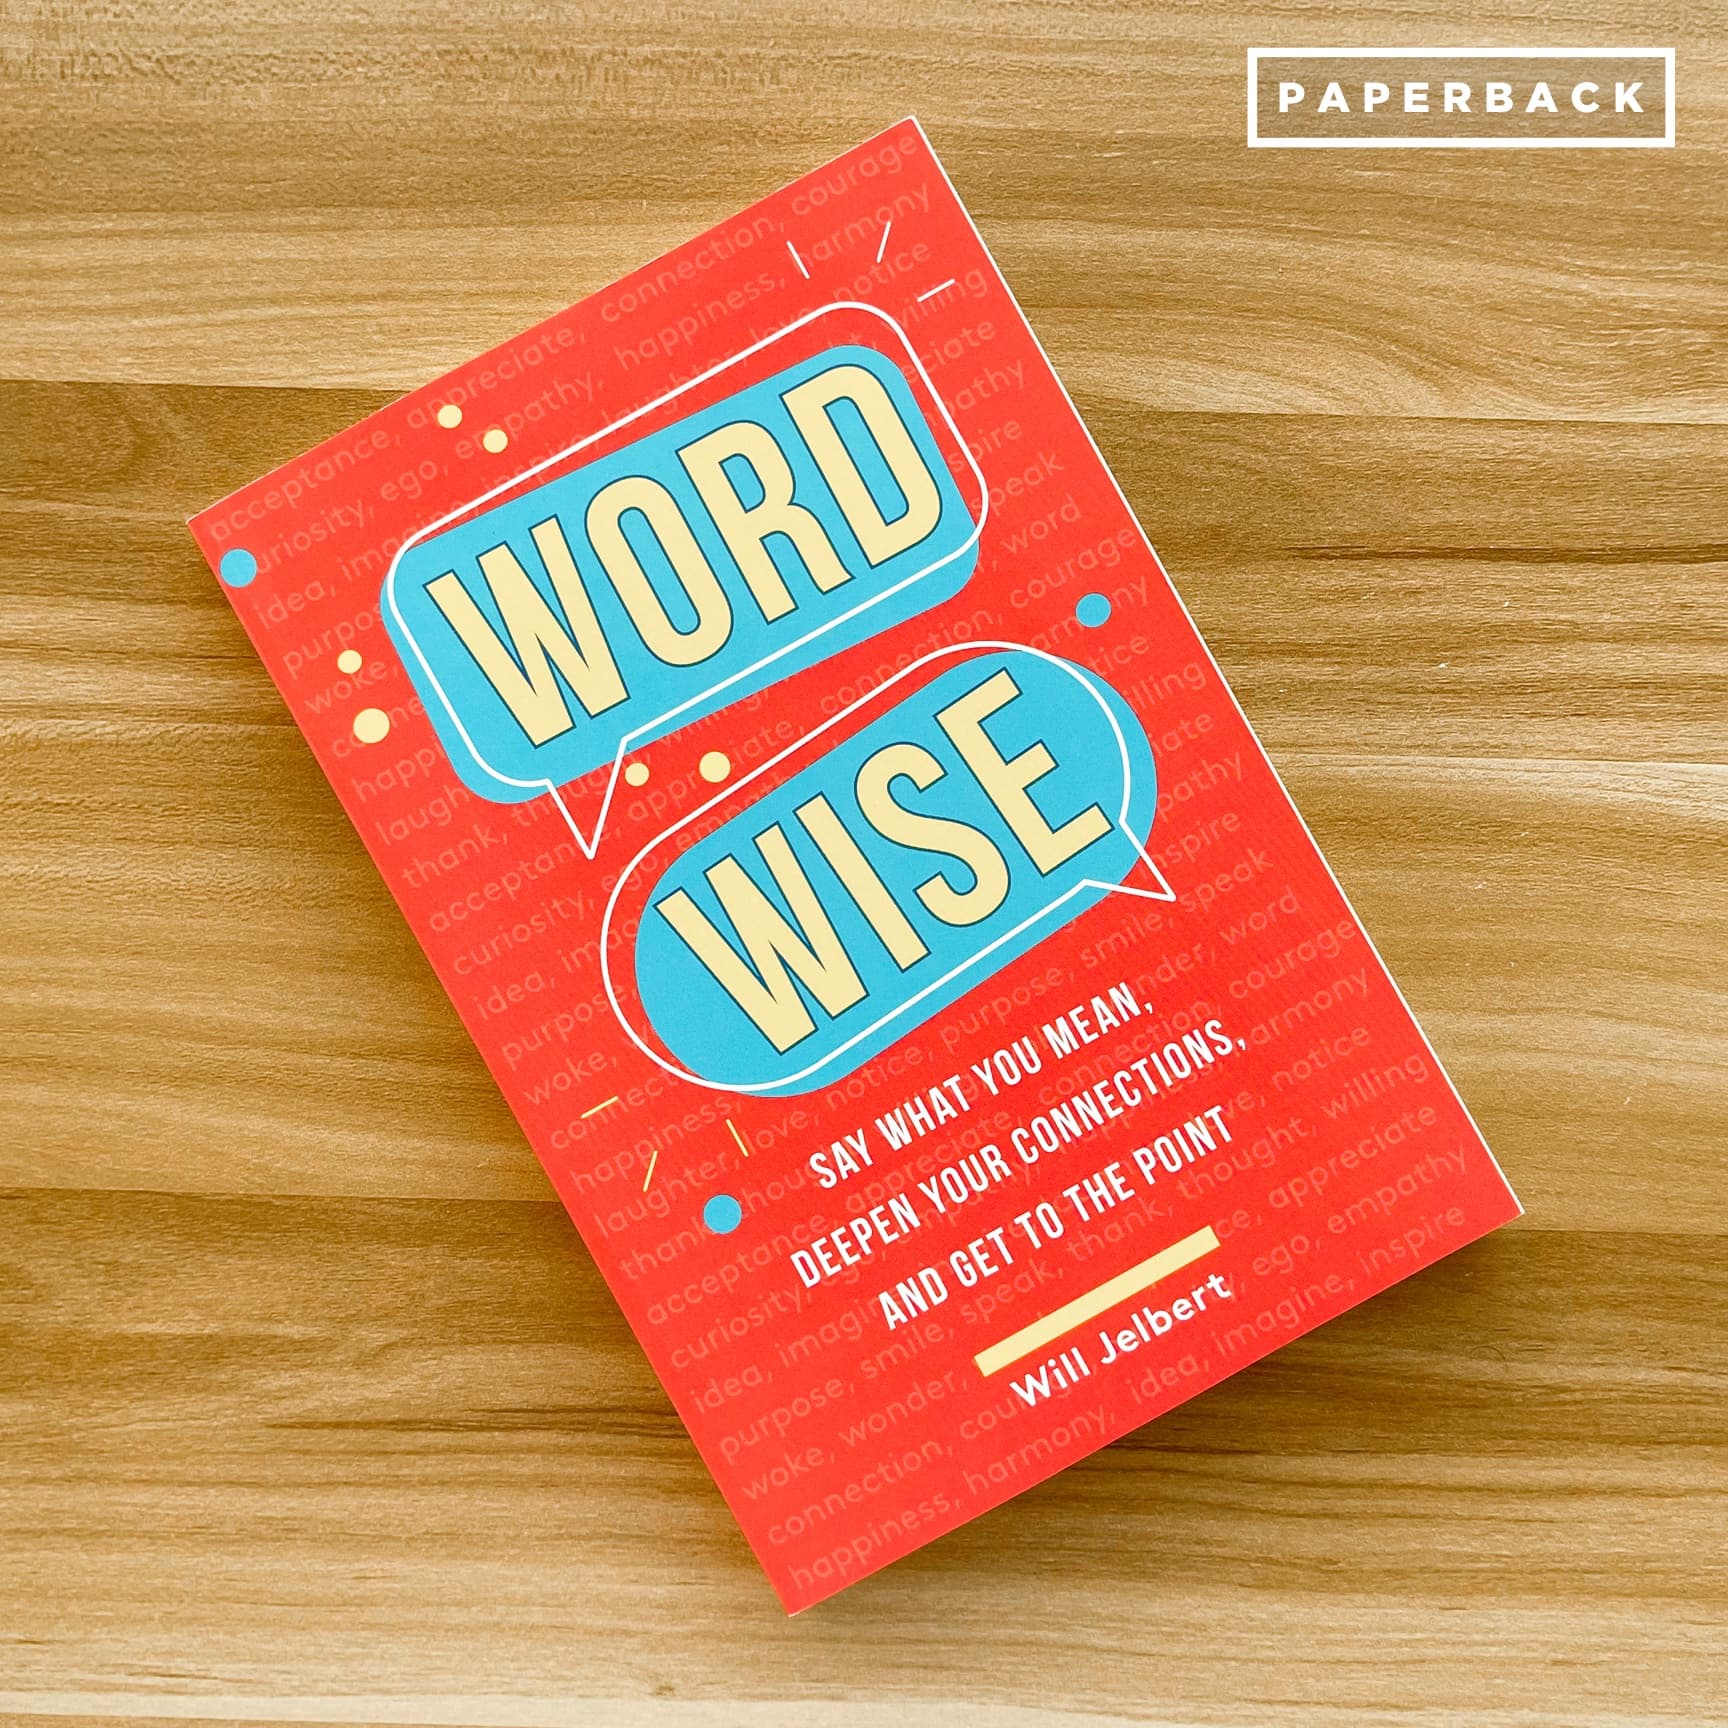 10 Thought-Provoking Quotes from "Word Wise" by Will Jelbert